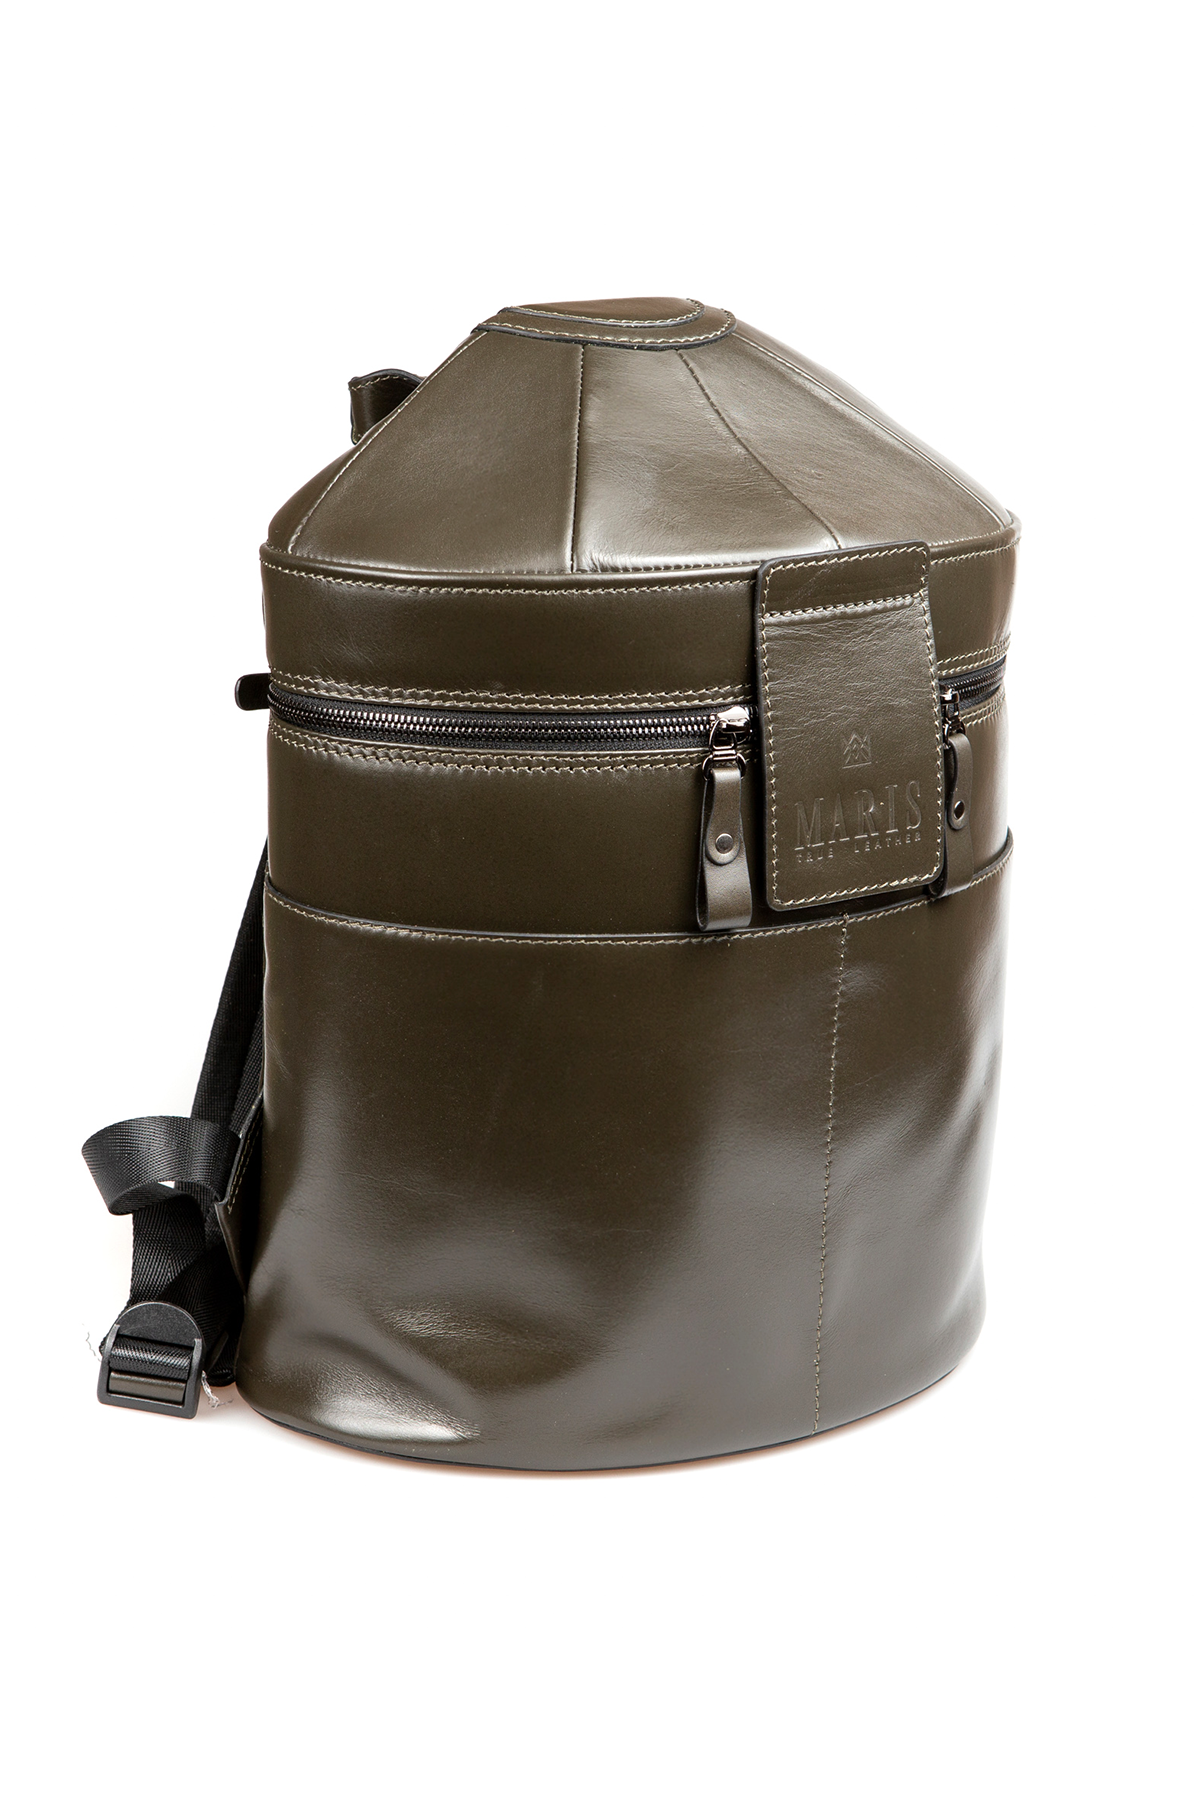 Green Yurt Style Leather Backpack by Maris